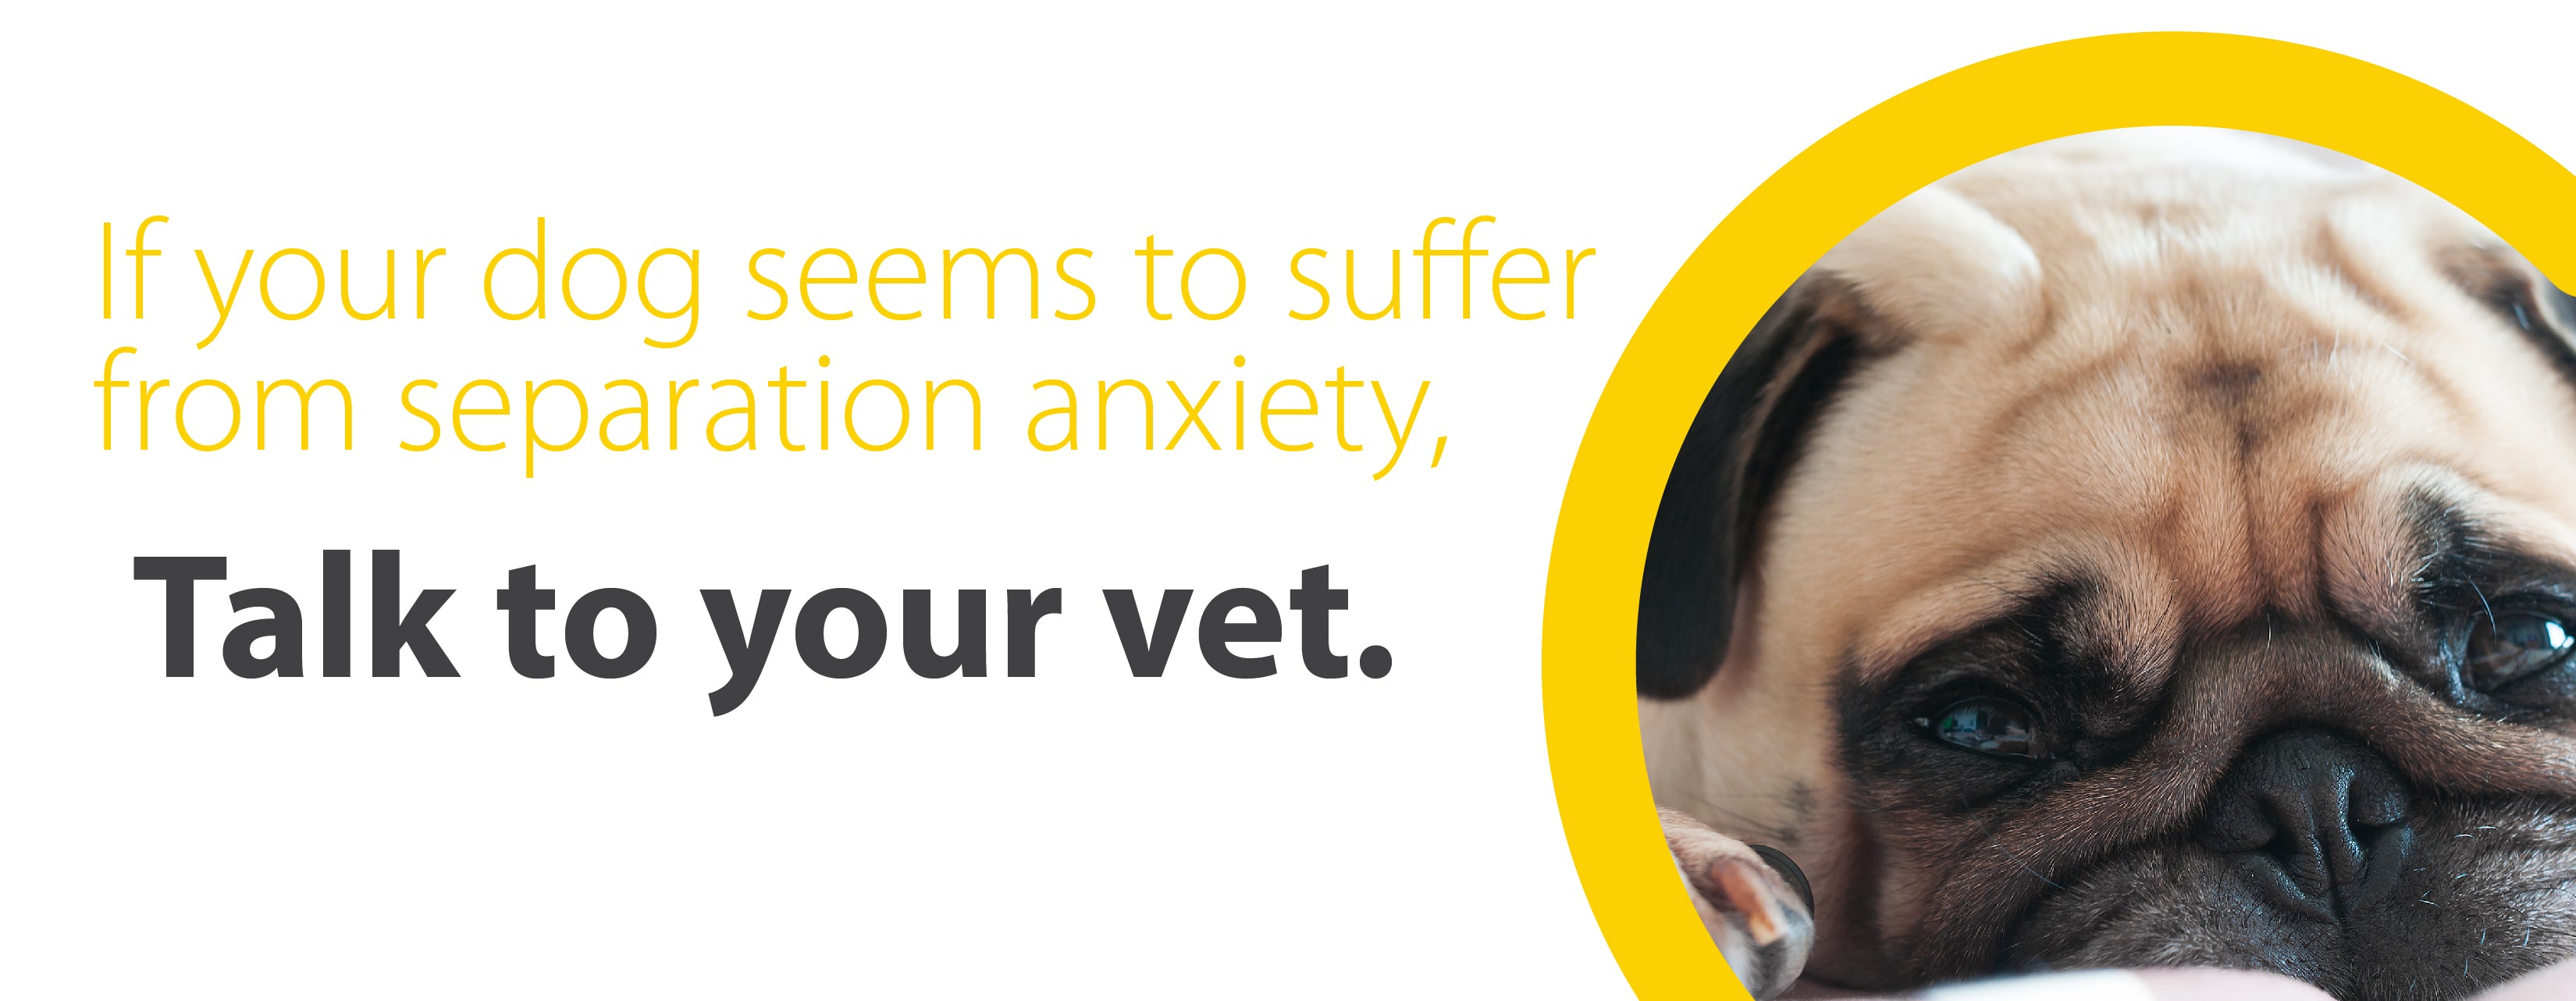 if your dog suffers from separation anxiety talk to your vet